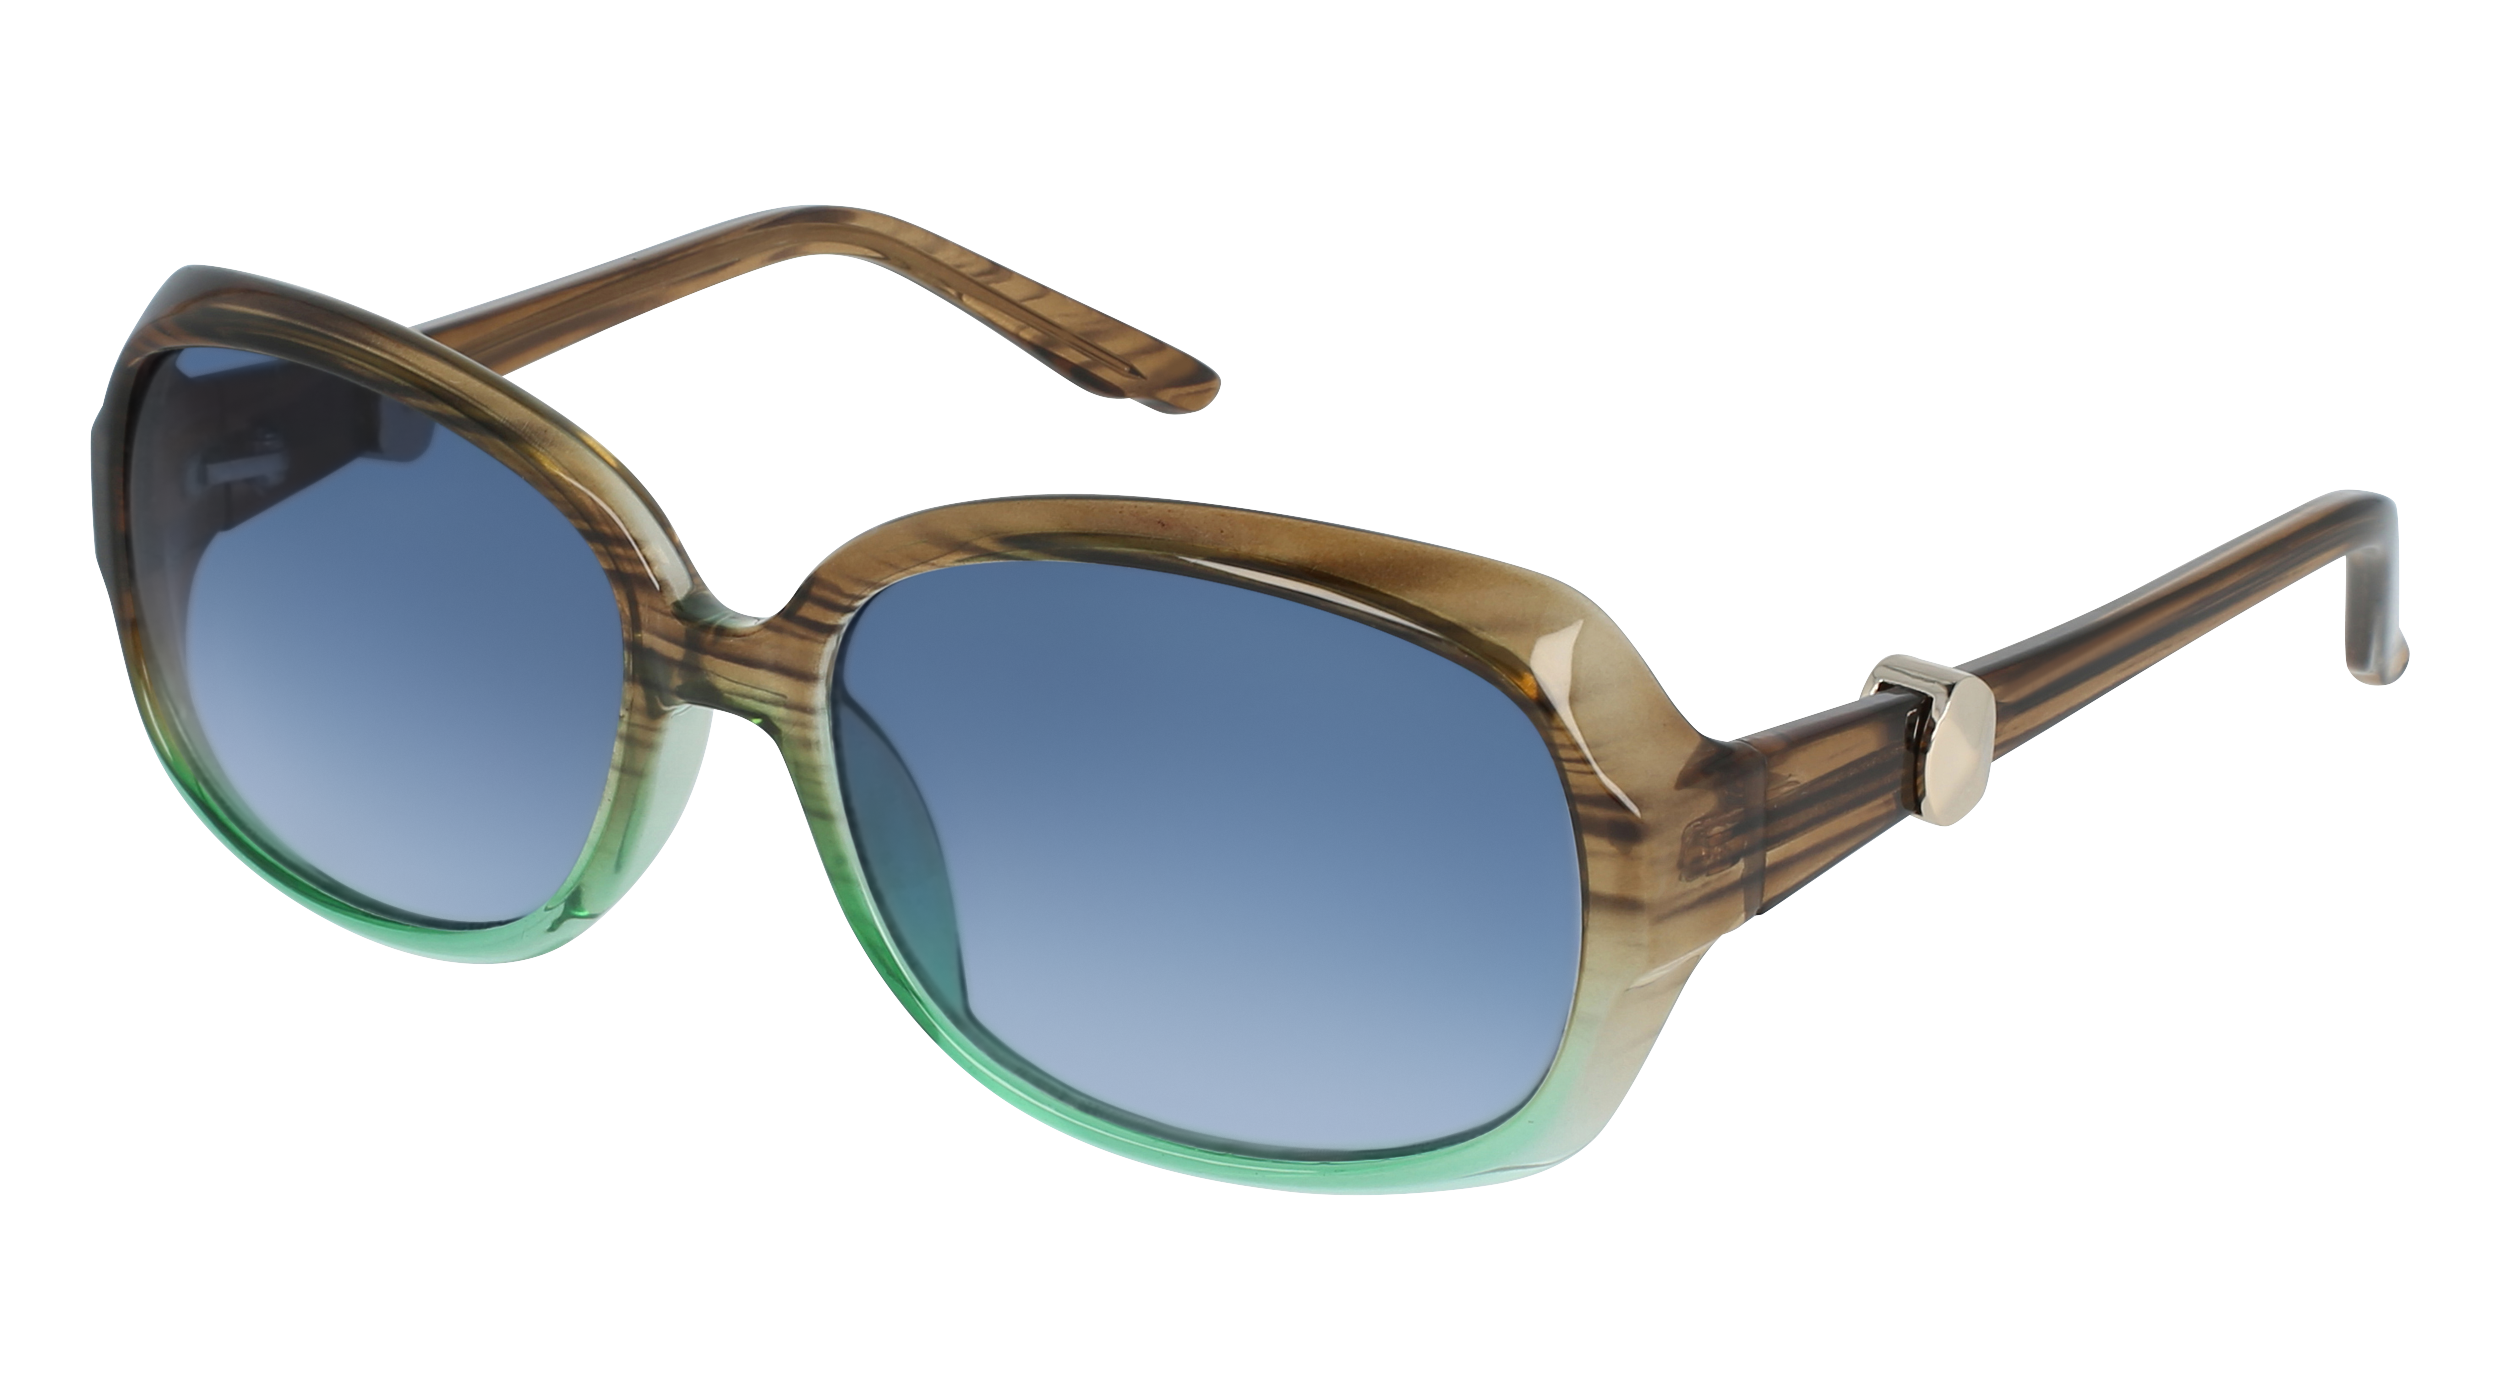 R S 672 women's sunglasses (from the side)